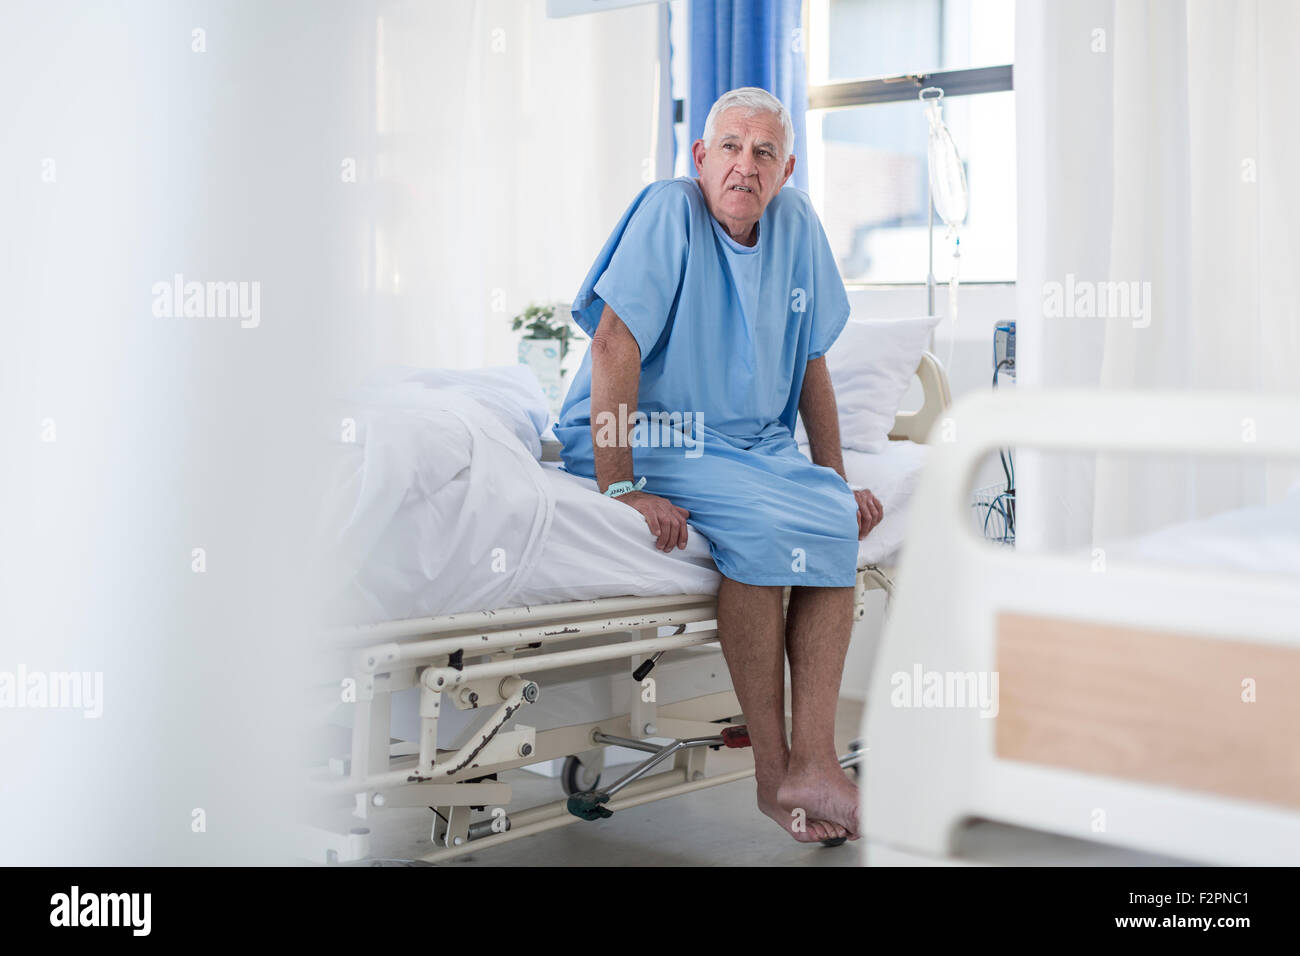 Senior patient sitting on hospital bed Stock Photo